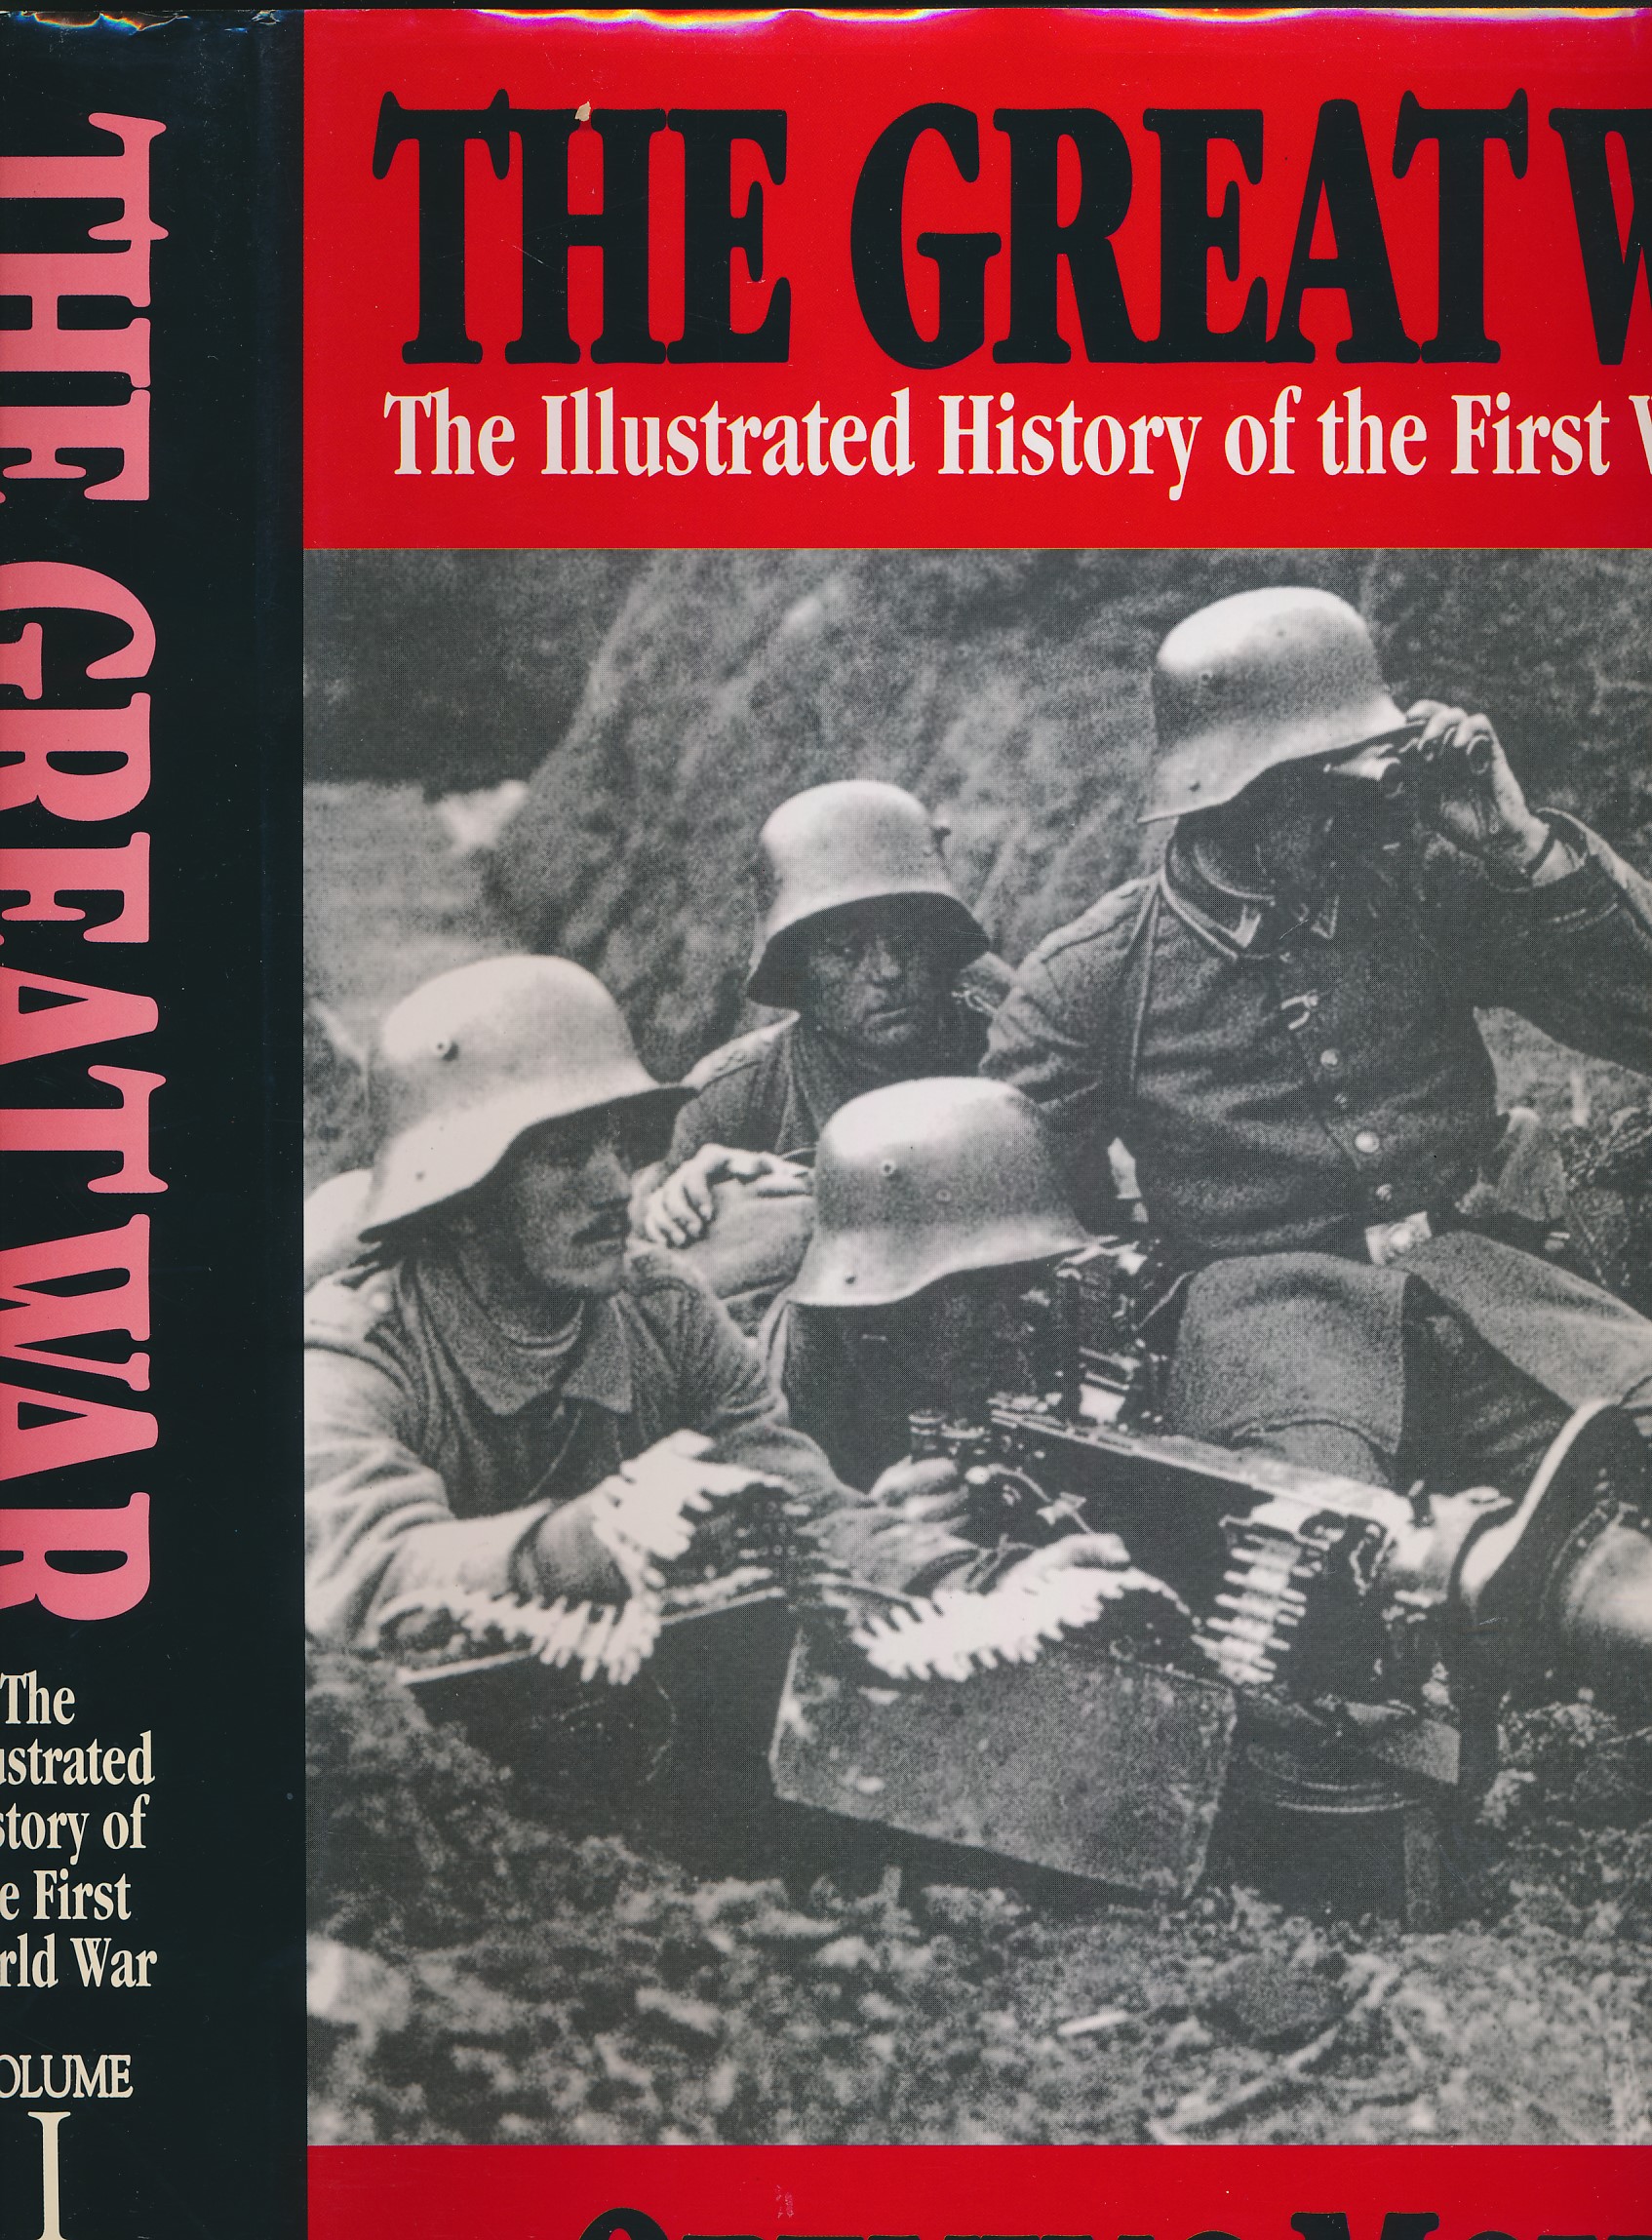 The Great War. The Illustrated History of the First World War. 6 volume set.